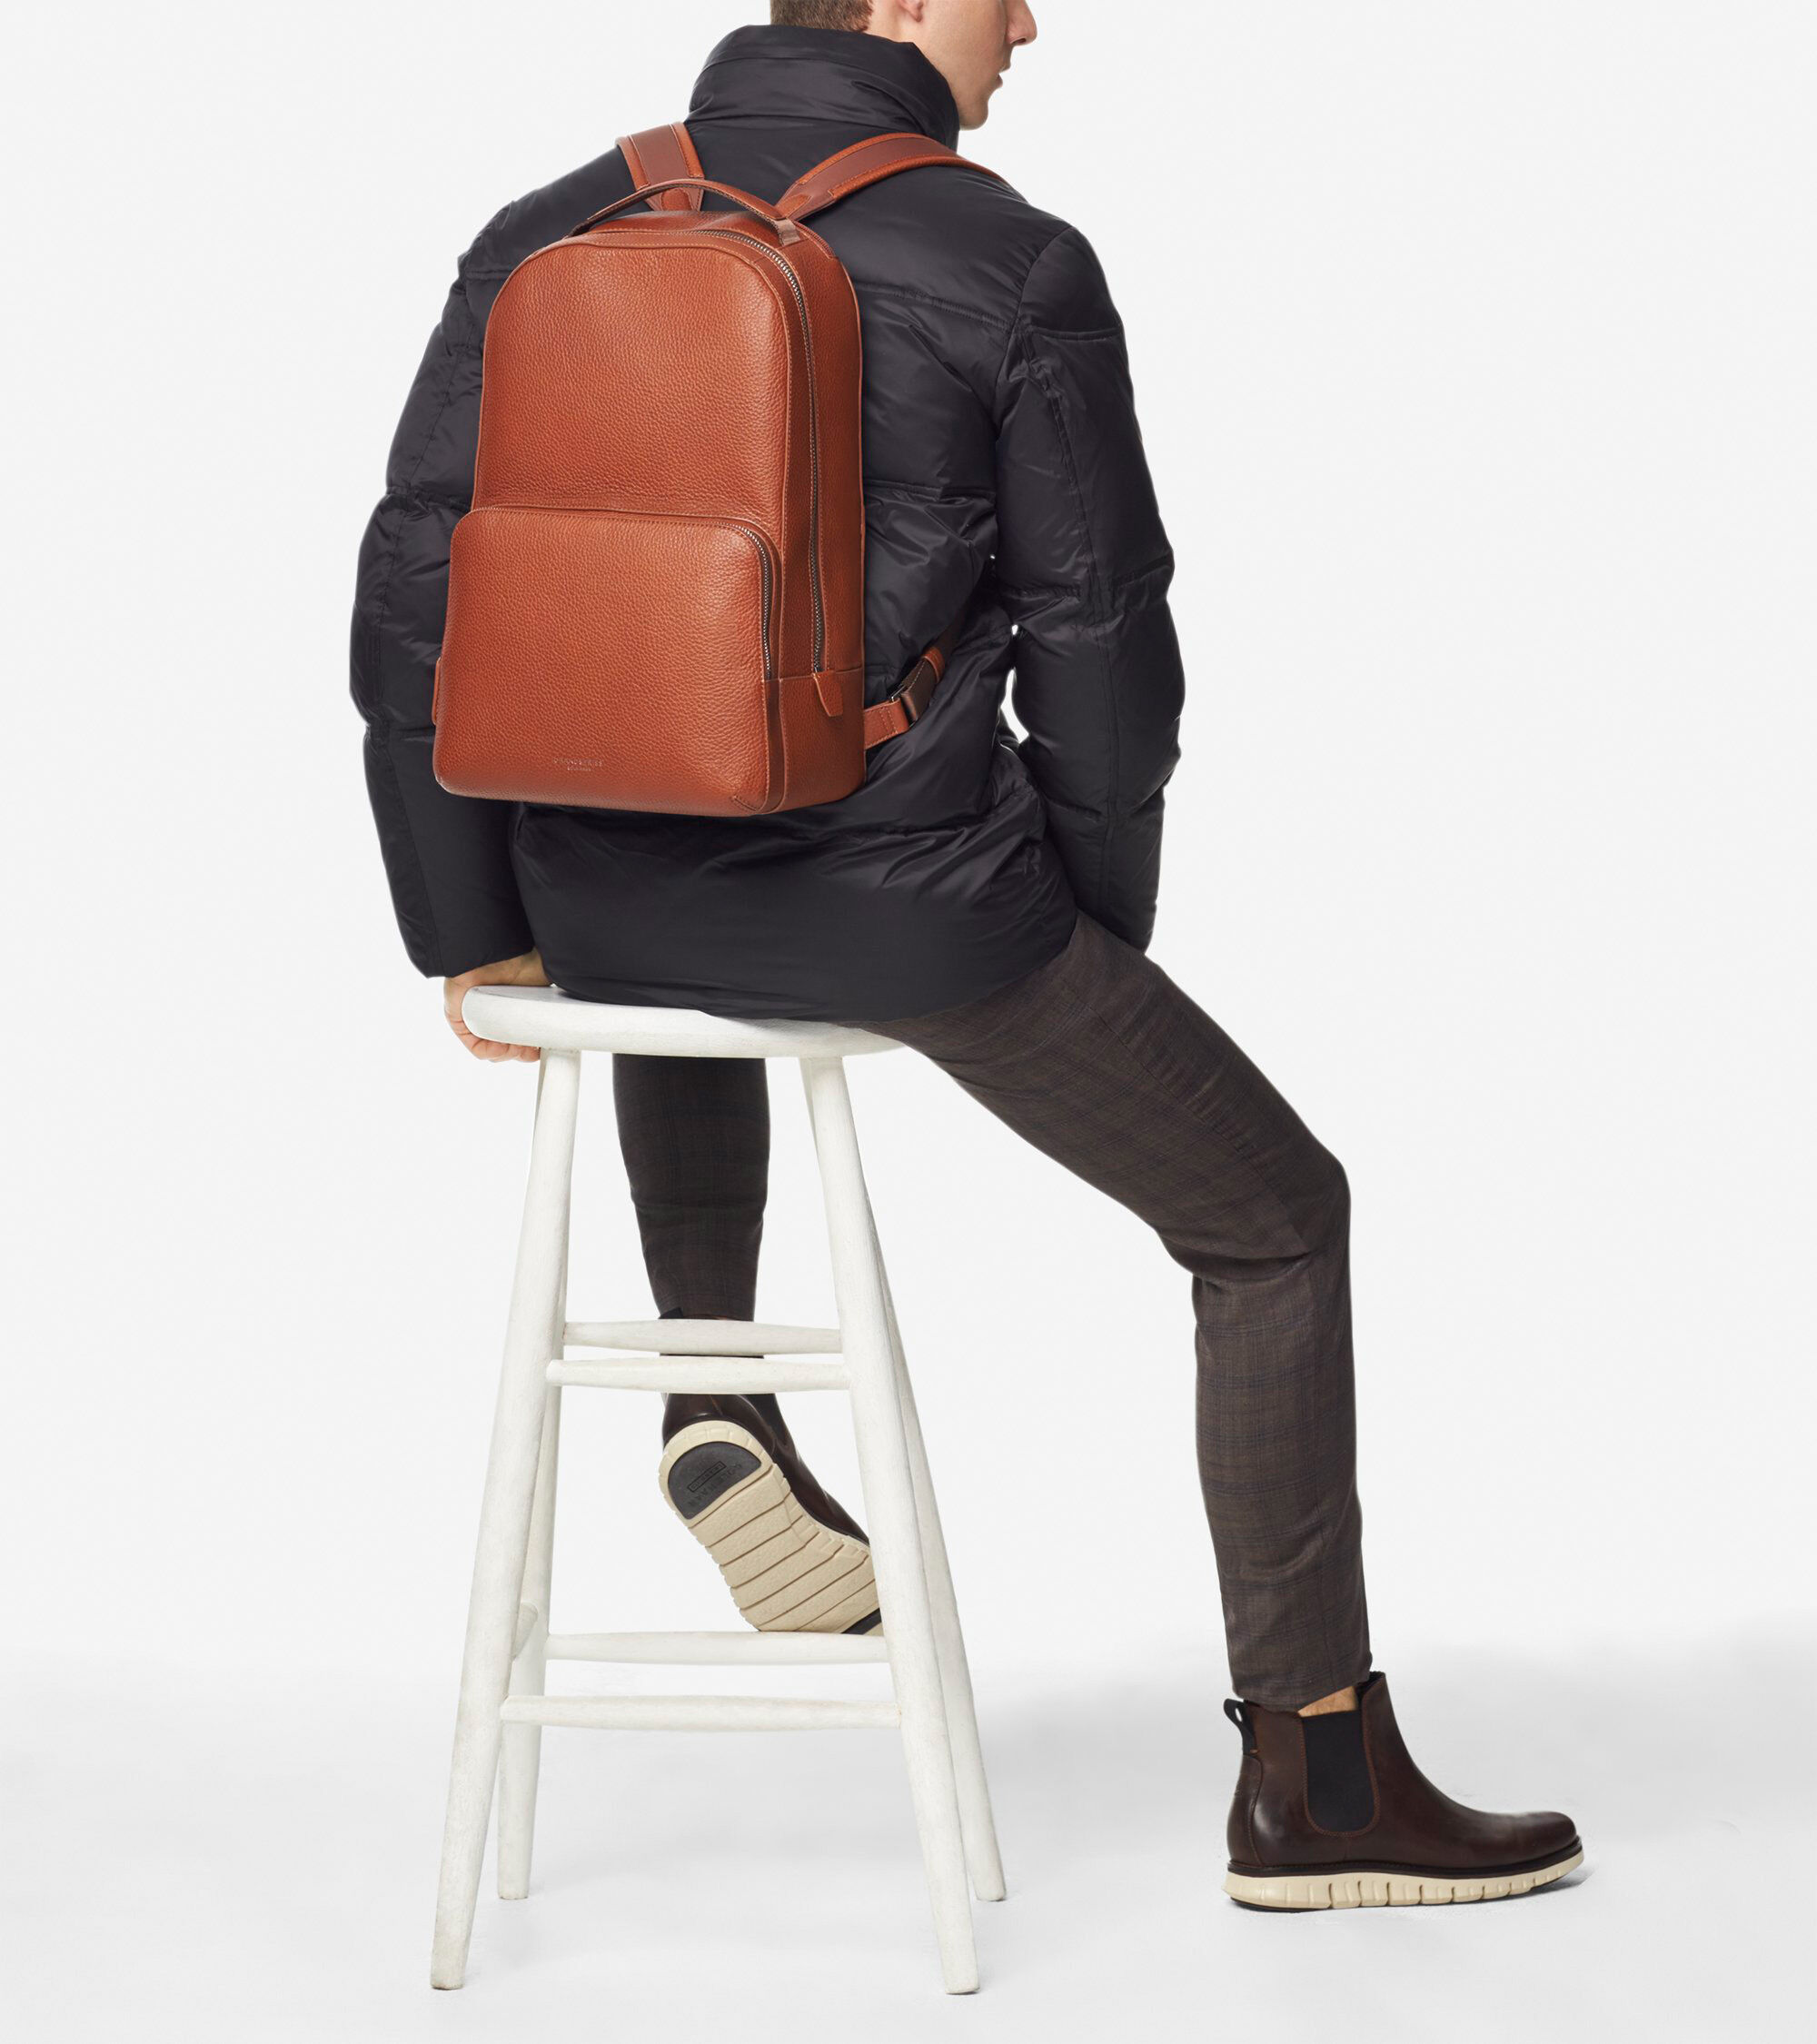 GRANDSERIES Leather Backpack